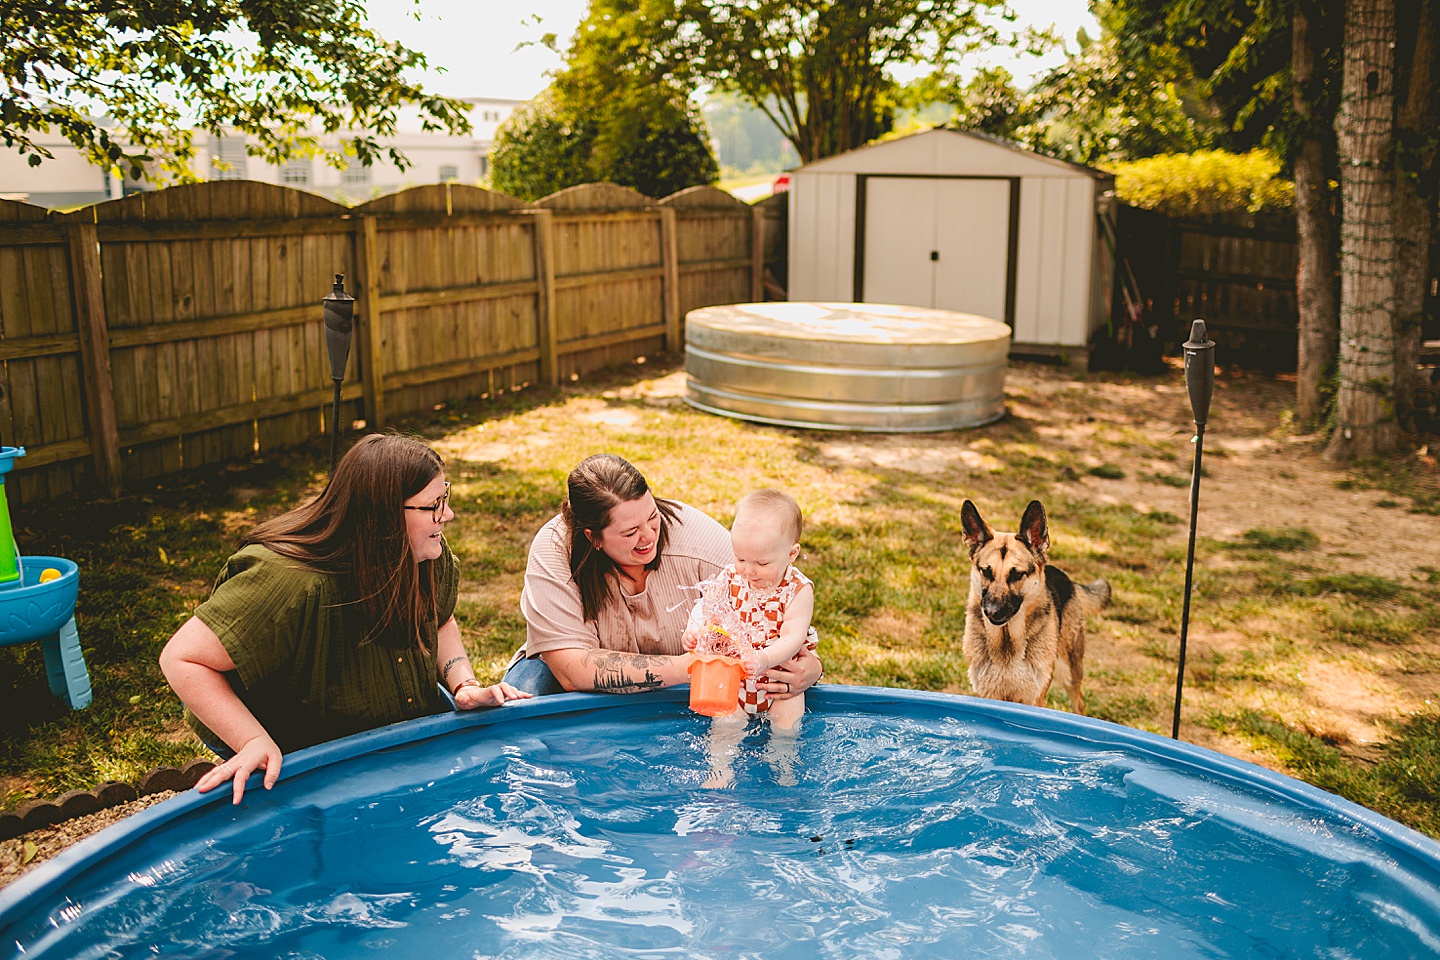 Baby playing in a pool with moms